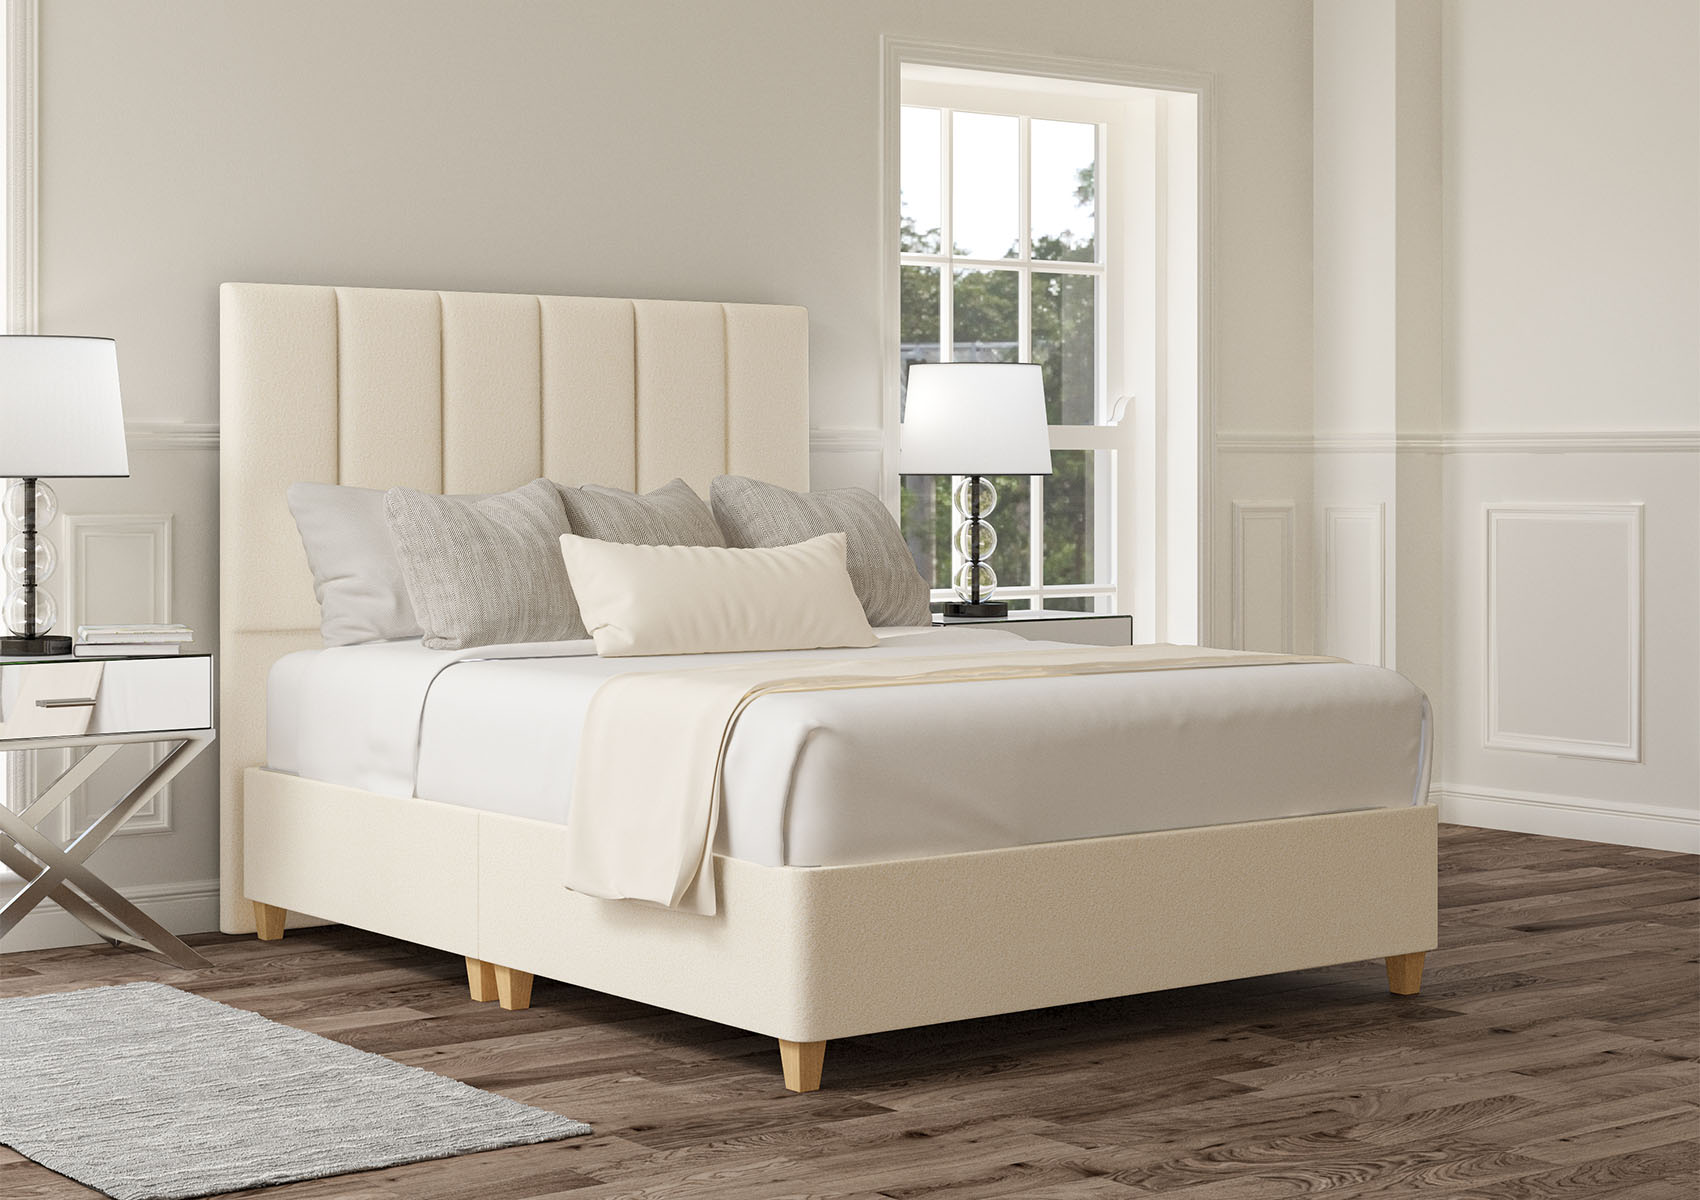 View Empire Arlington Candyfloss Upholstered King Size Divan Bed Time4Sleep information